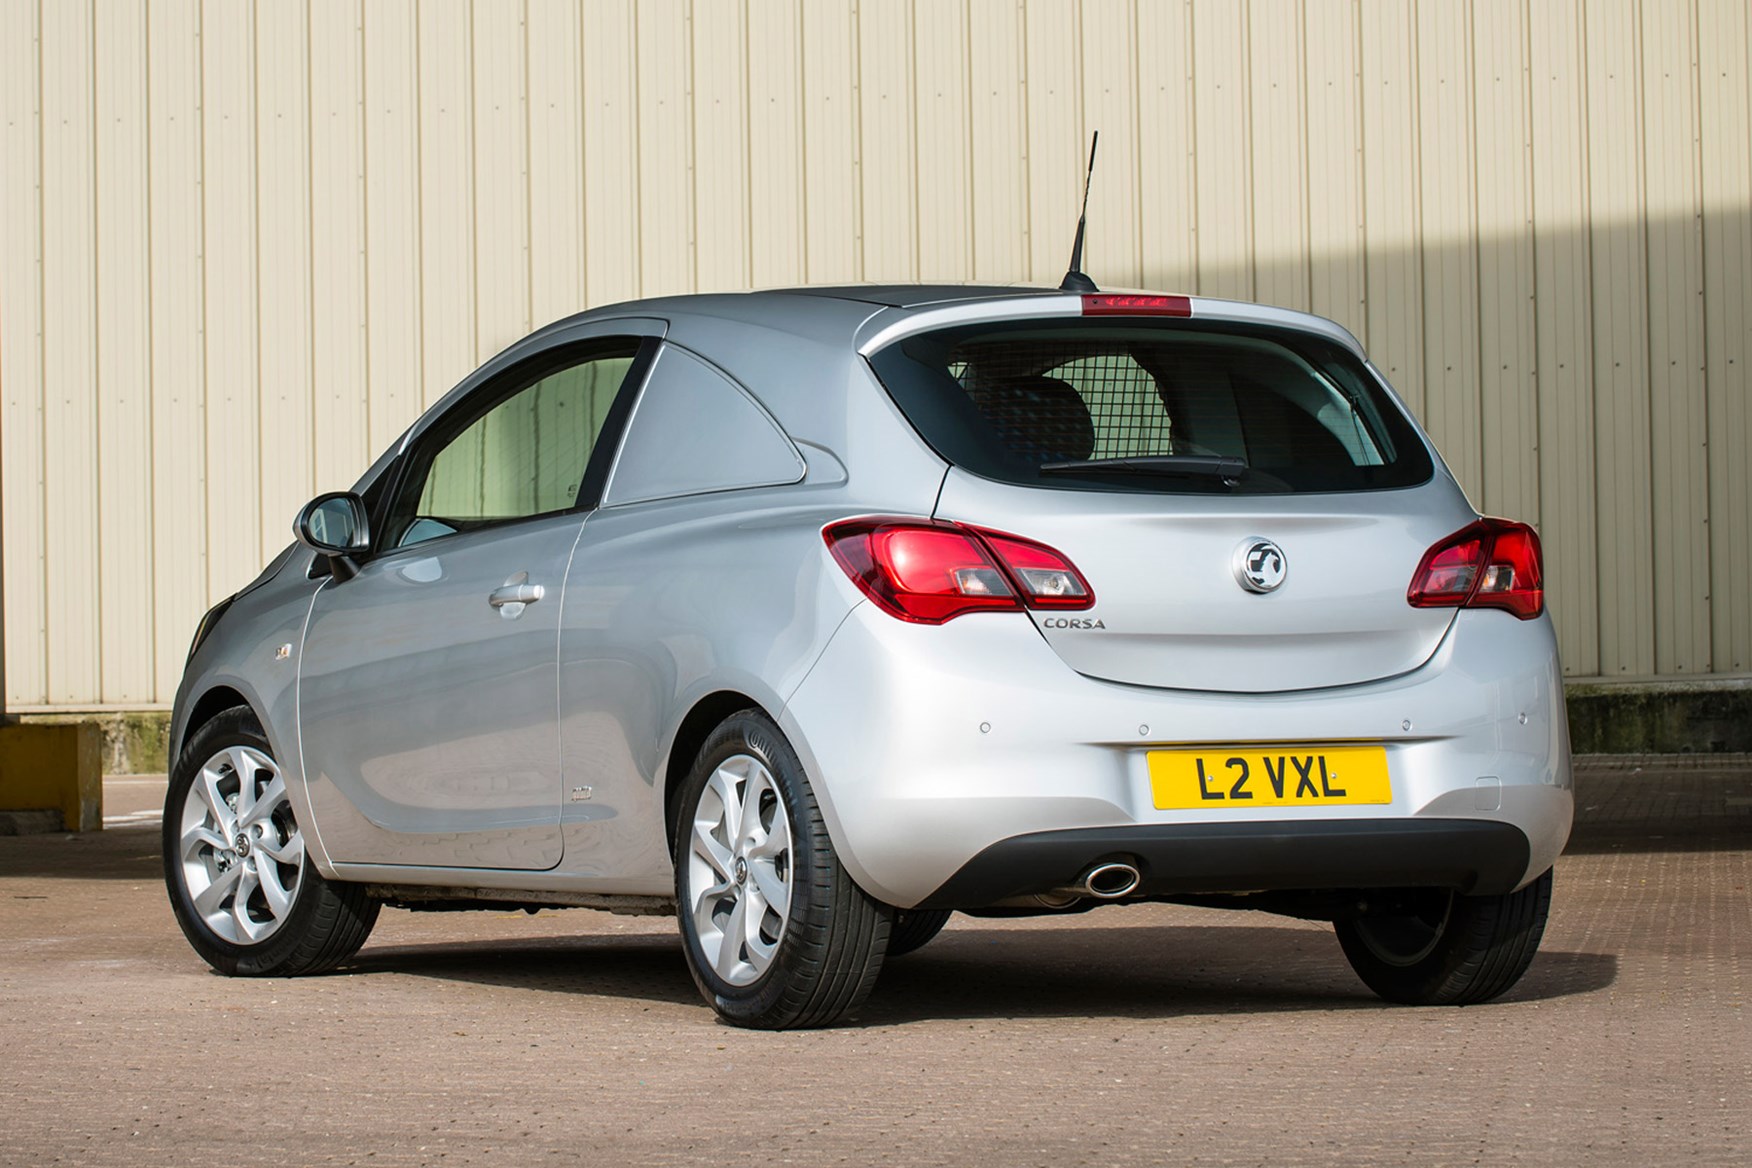 Vauxhall Corsa full review on Parkers Vans - rear exterior